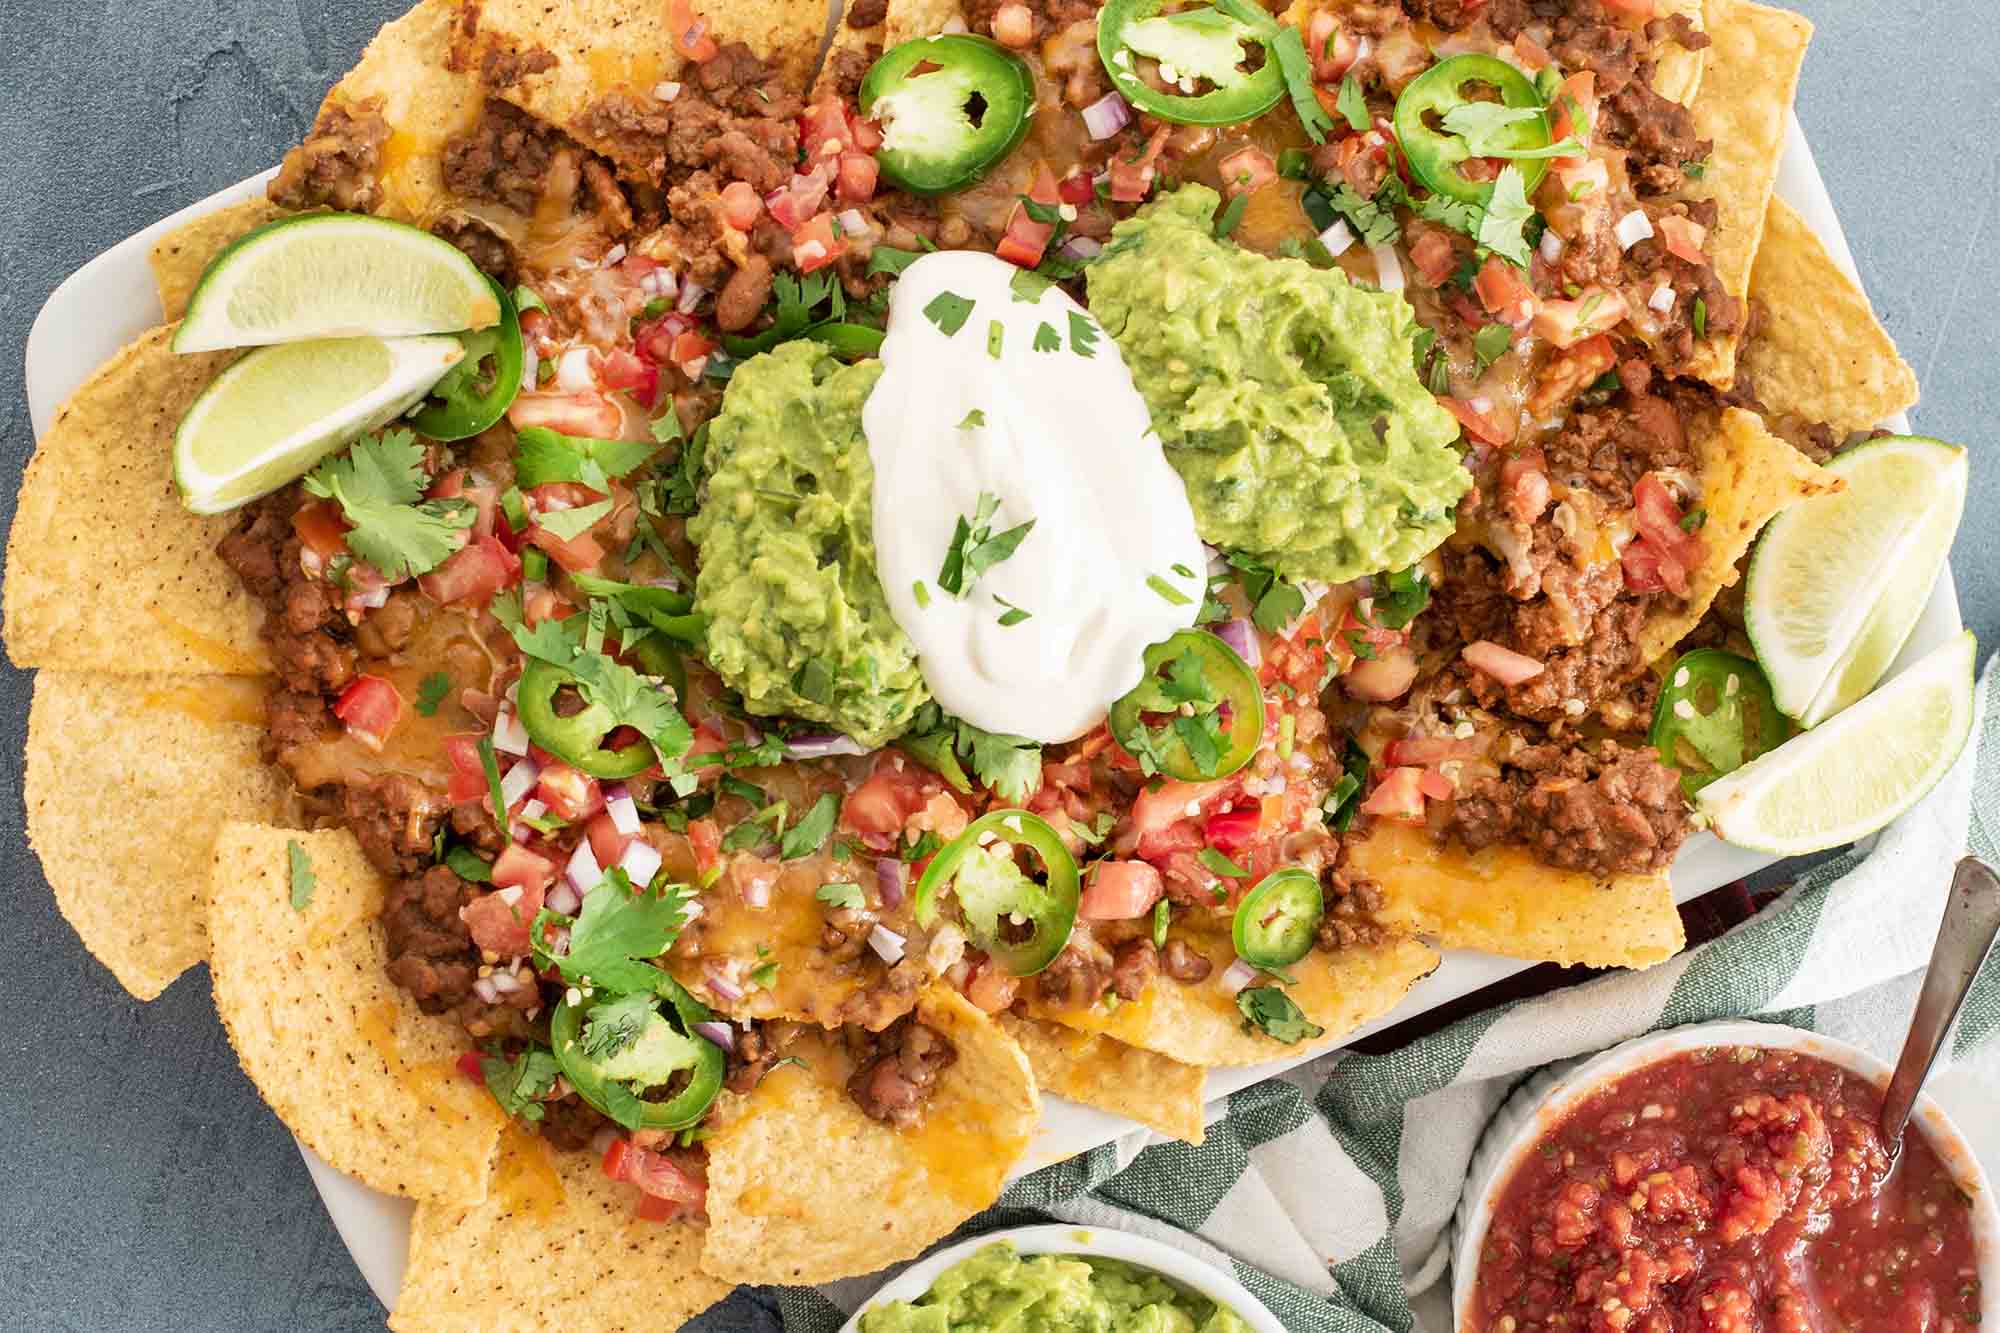 🌮 Eat an International Food for Every Letter of the Alphabet If You Want Us to Guess Your Generation Nachos